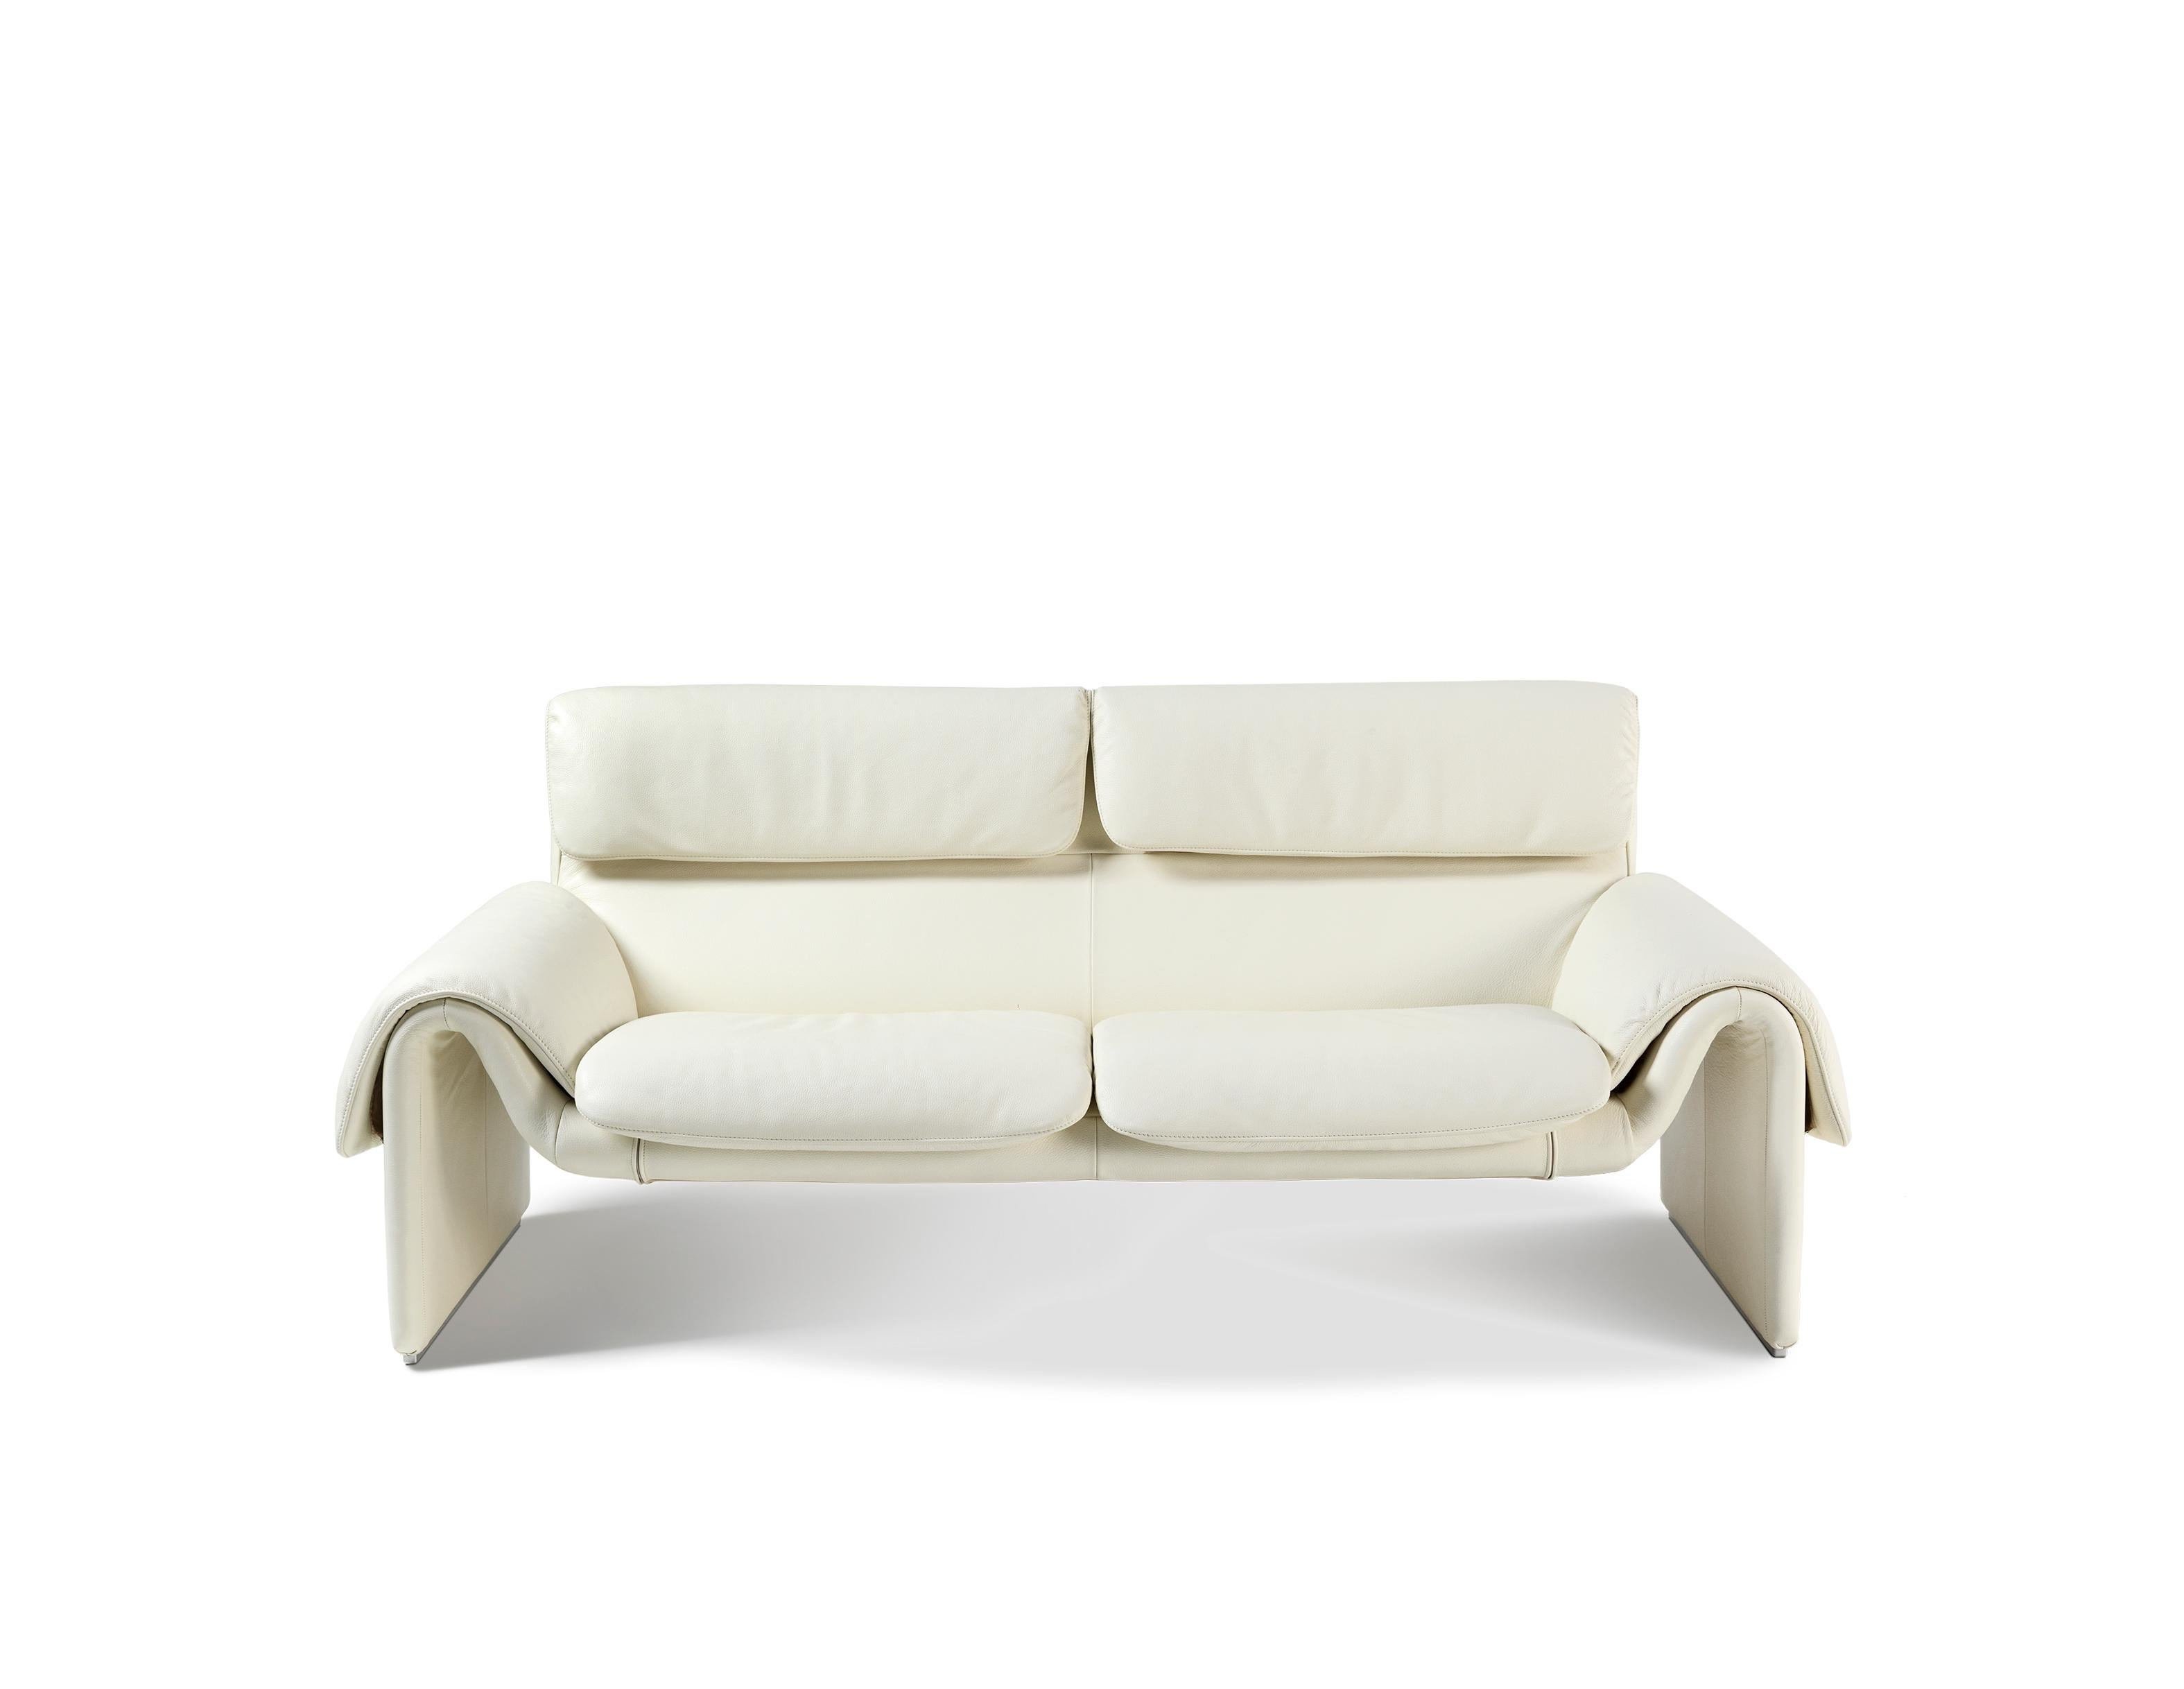 DS-2011/02 sofa by De Sede
Dimensions: D 59 x W 163 x H 84 cm
Materials: beechwood, leather

Prices may change according to the chosen materials and size. 

Aesthetics and functionality in a harmonious combination. An impressive design with a solid